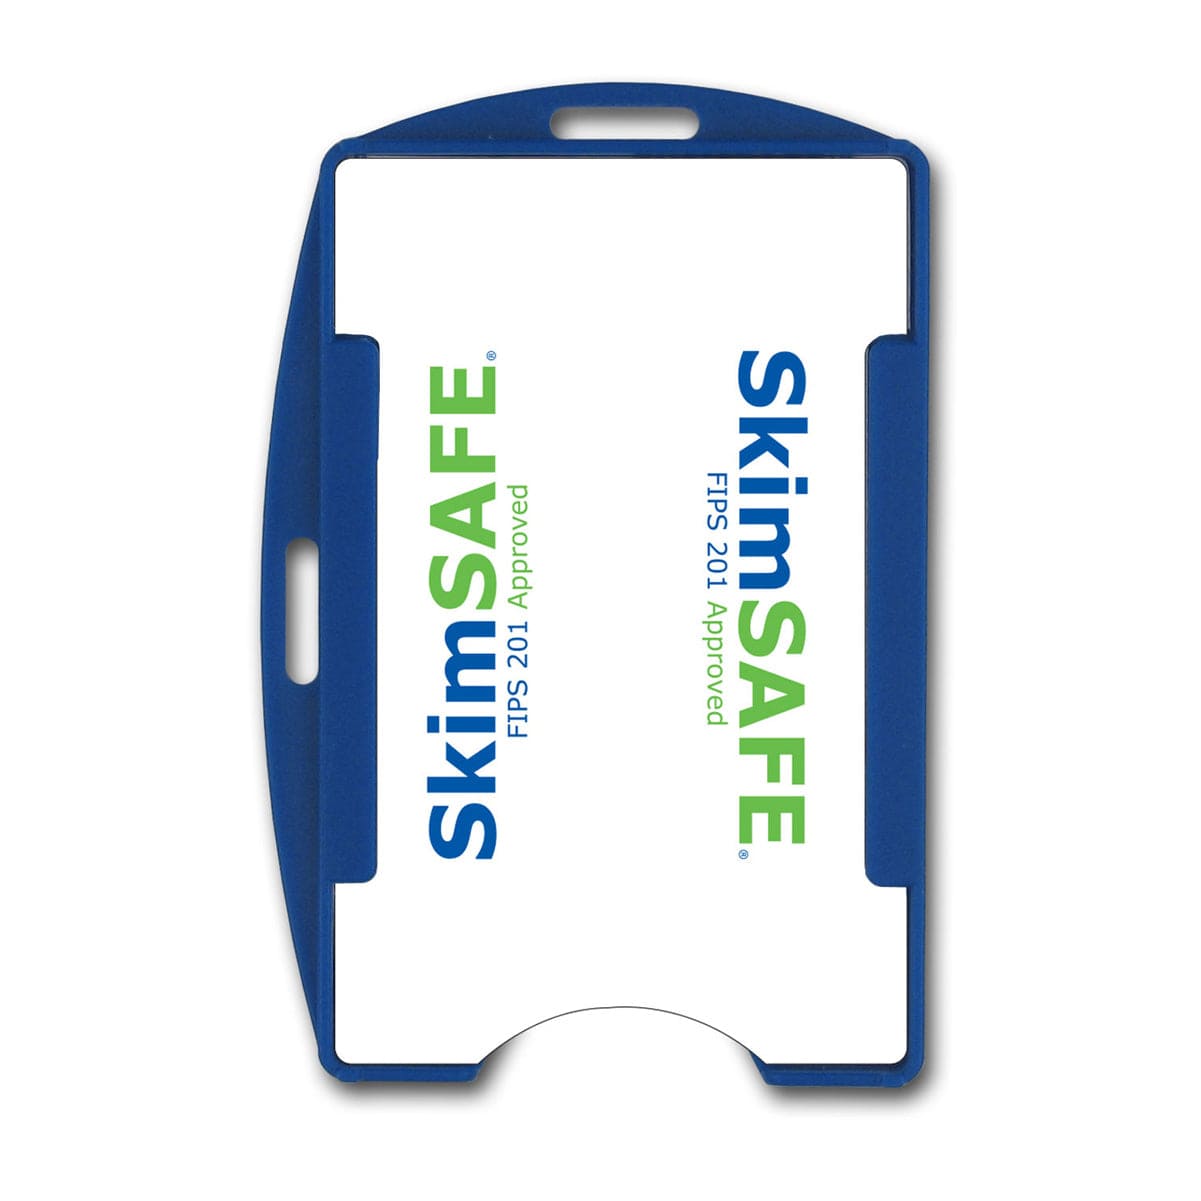 A blue and white SkimSAFE FIPS 201 RFID Blocking 2-Card ID Holder (AH-210) that is FIPS 201 approved, featuring RFID blocking. The SkimSAFE logo is printed in blue and green on the card inside.